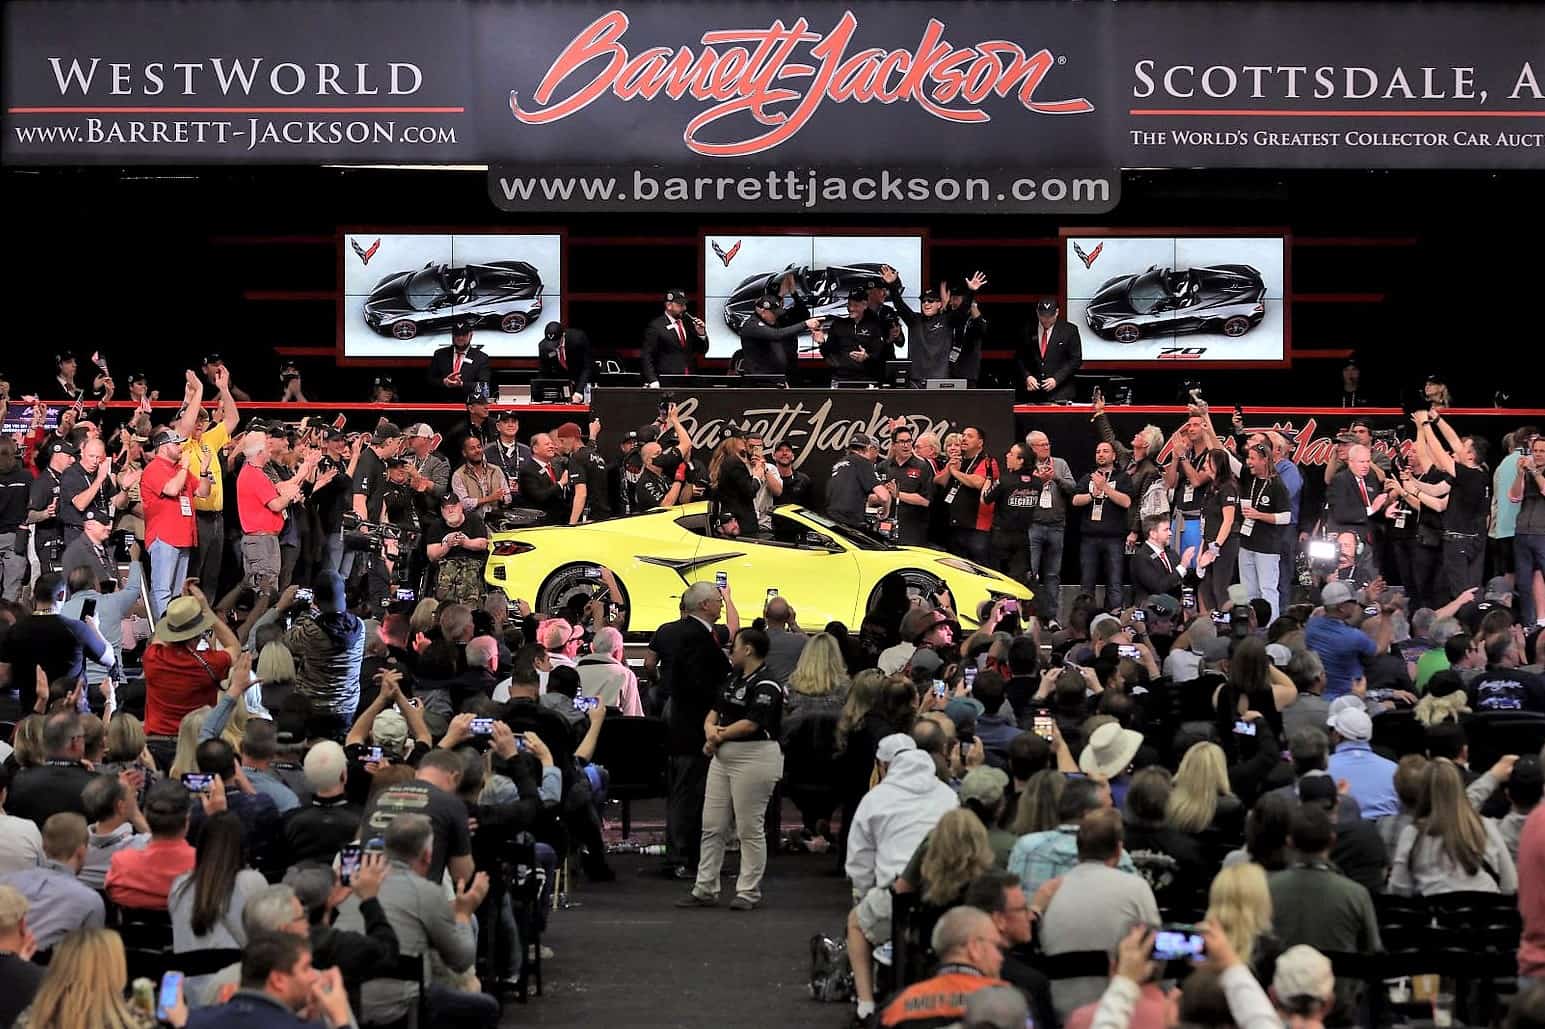 BarrettJackson raised 8.8 million for charity during Scottsdale auction